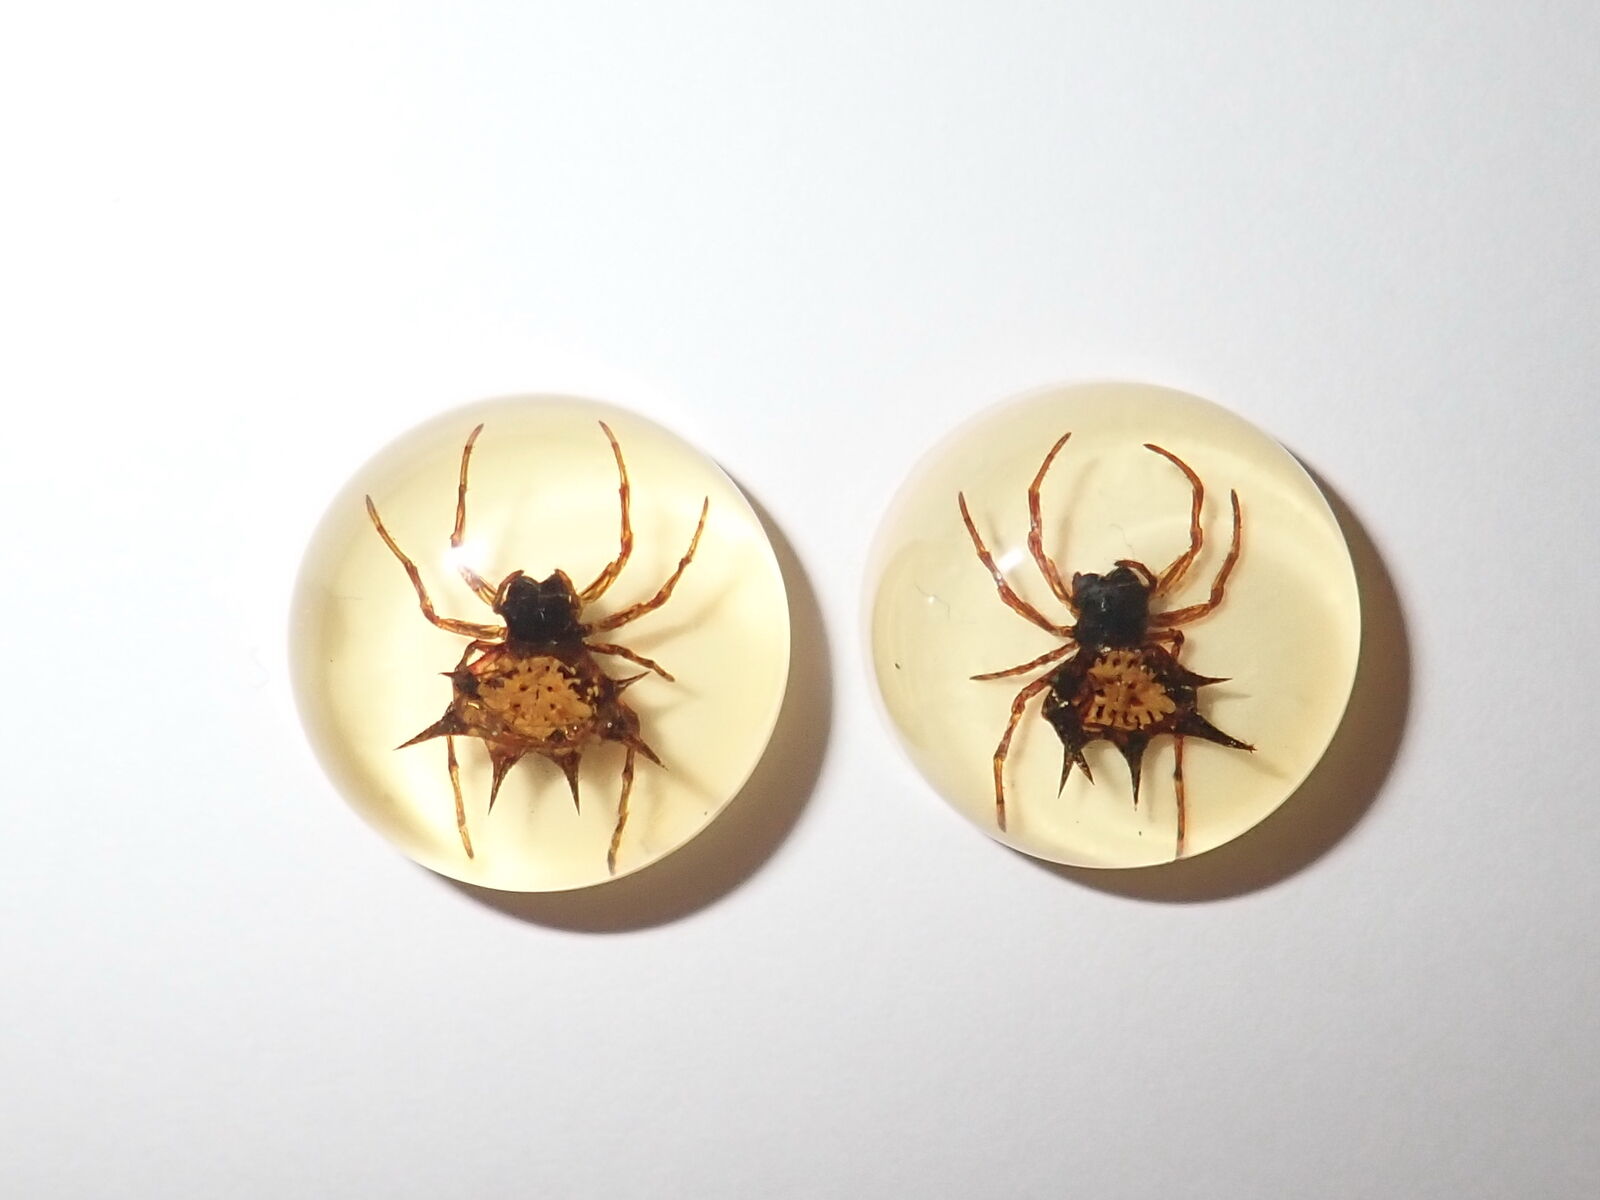 Resin Cabochon Round 19 mm Spiny Spider Amber White Bottom 2 Pieces Lot